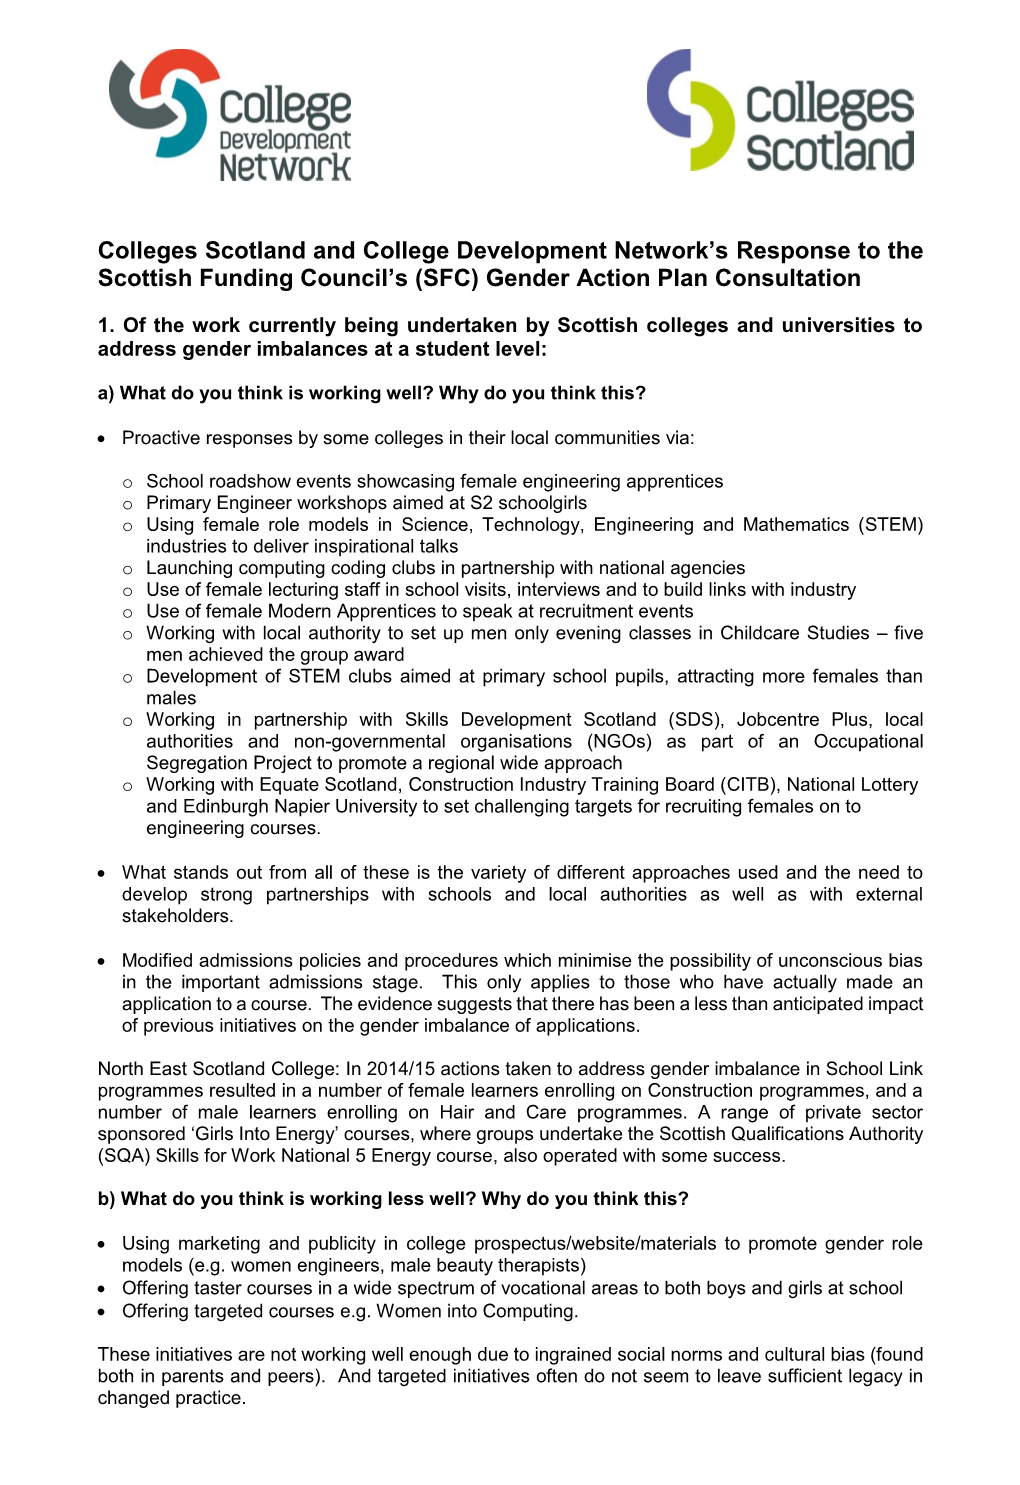 Colleges Scotland and College Development Network's Response to the Scottish Funding Council's (SFC) Gender Action Plan Cons